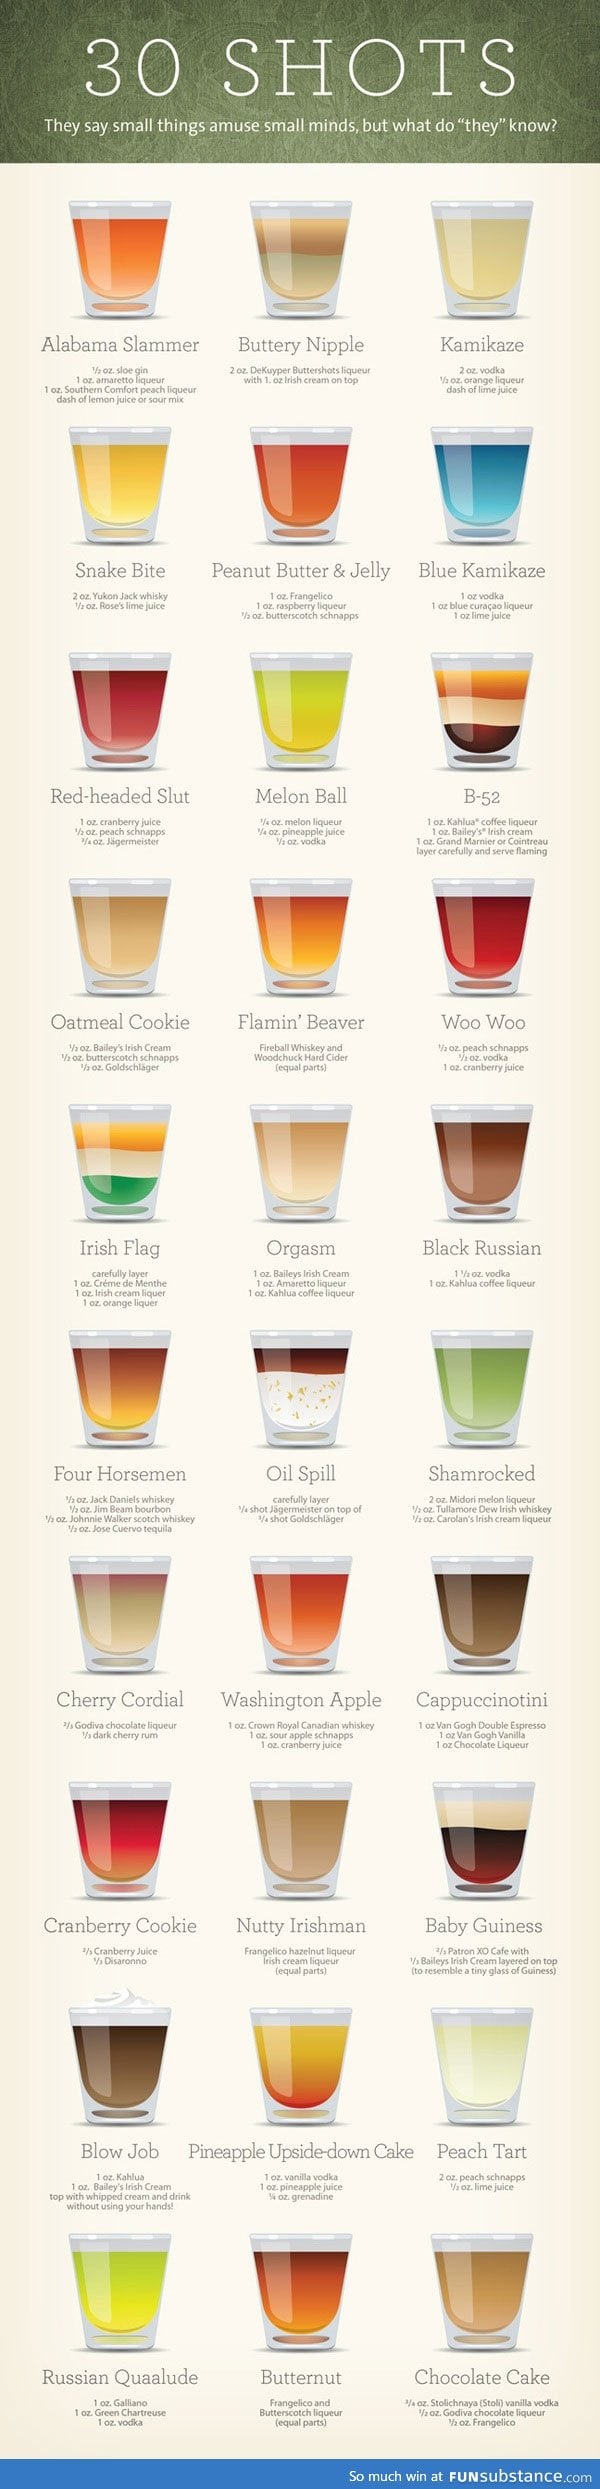 30 different types of shots